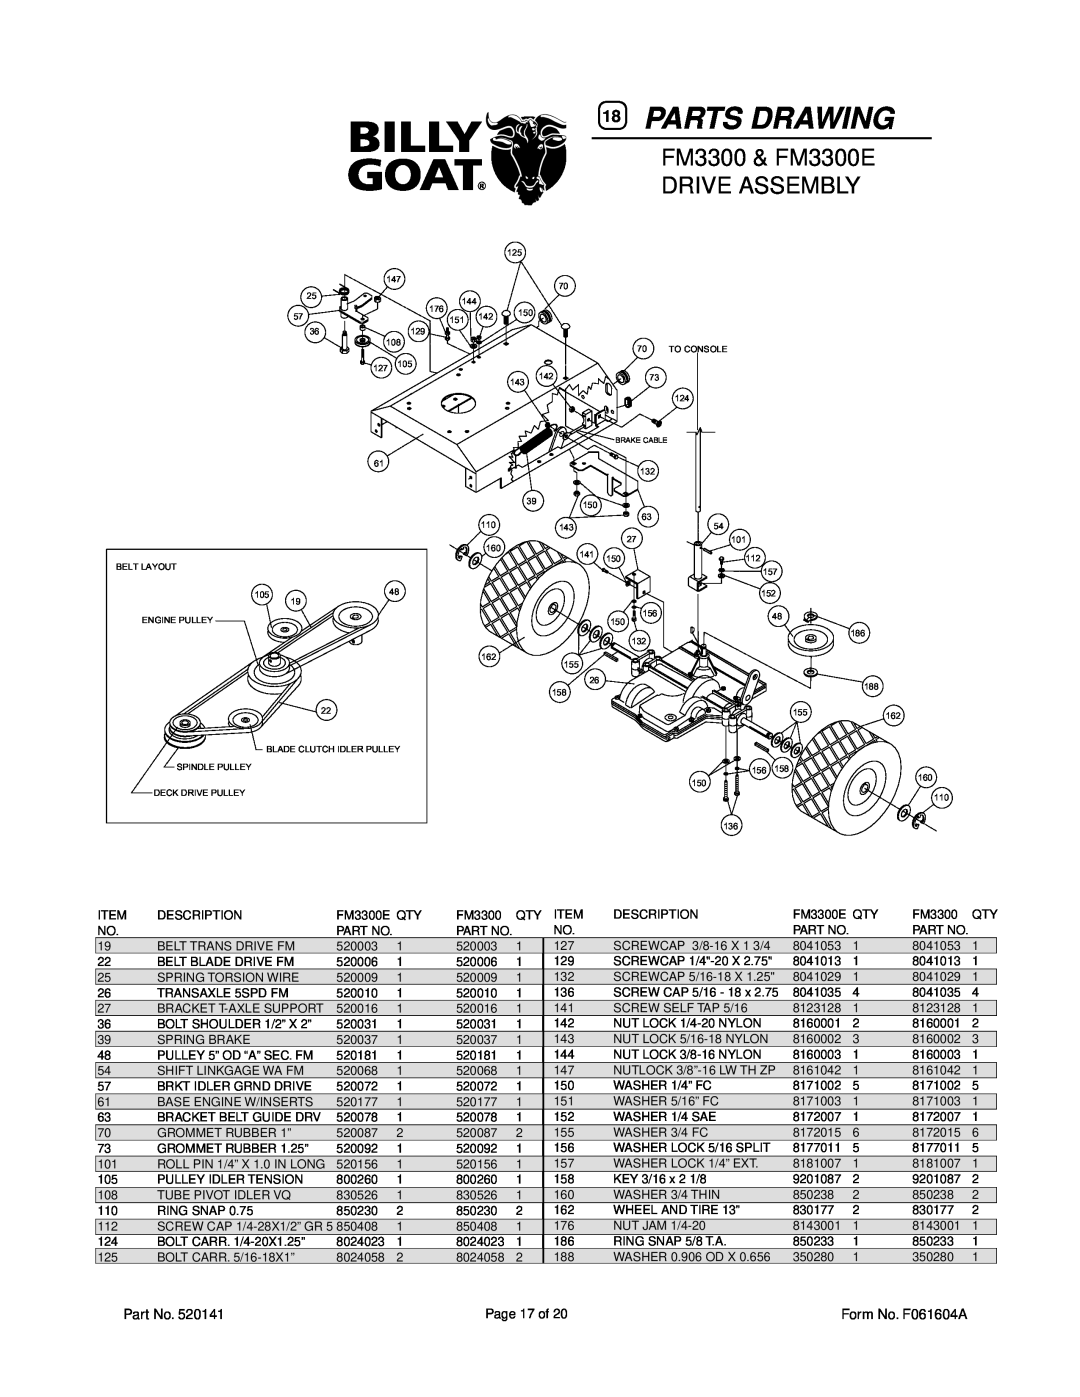 Briggs & Stratton owner manual Drive Assembly, Parts Drawing, FM3300 & FM3300E 